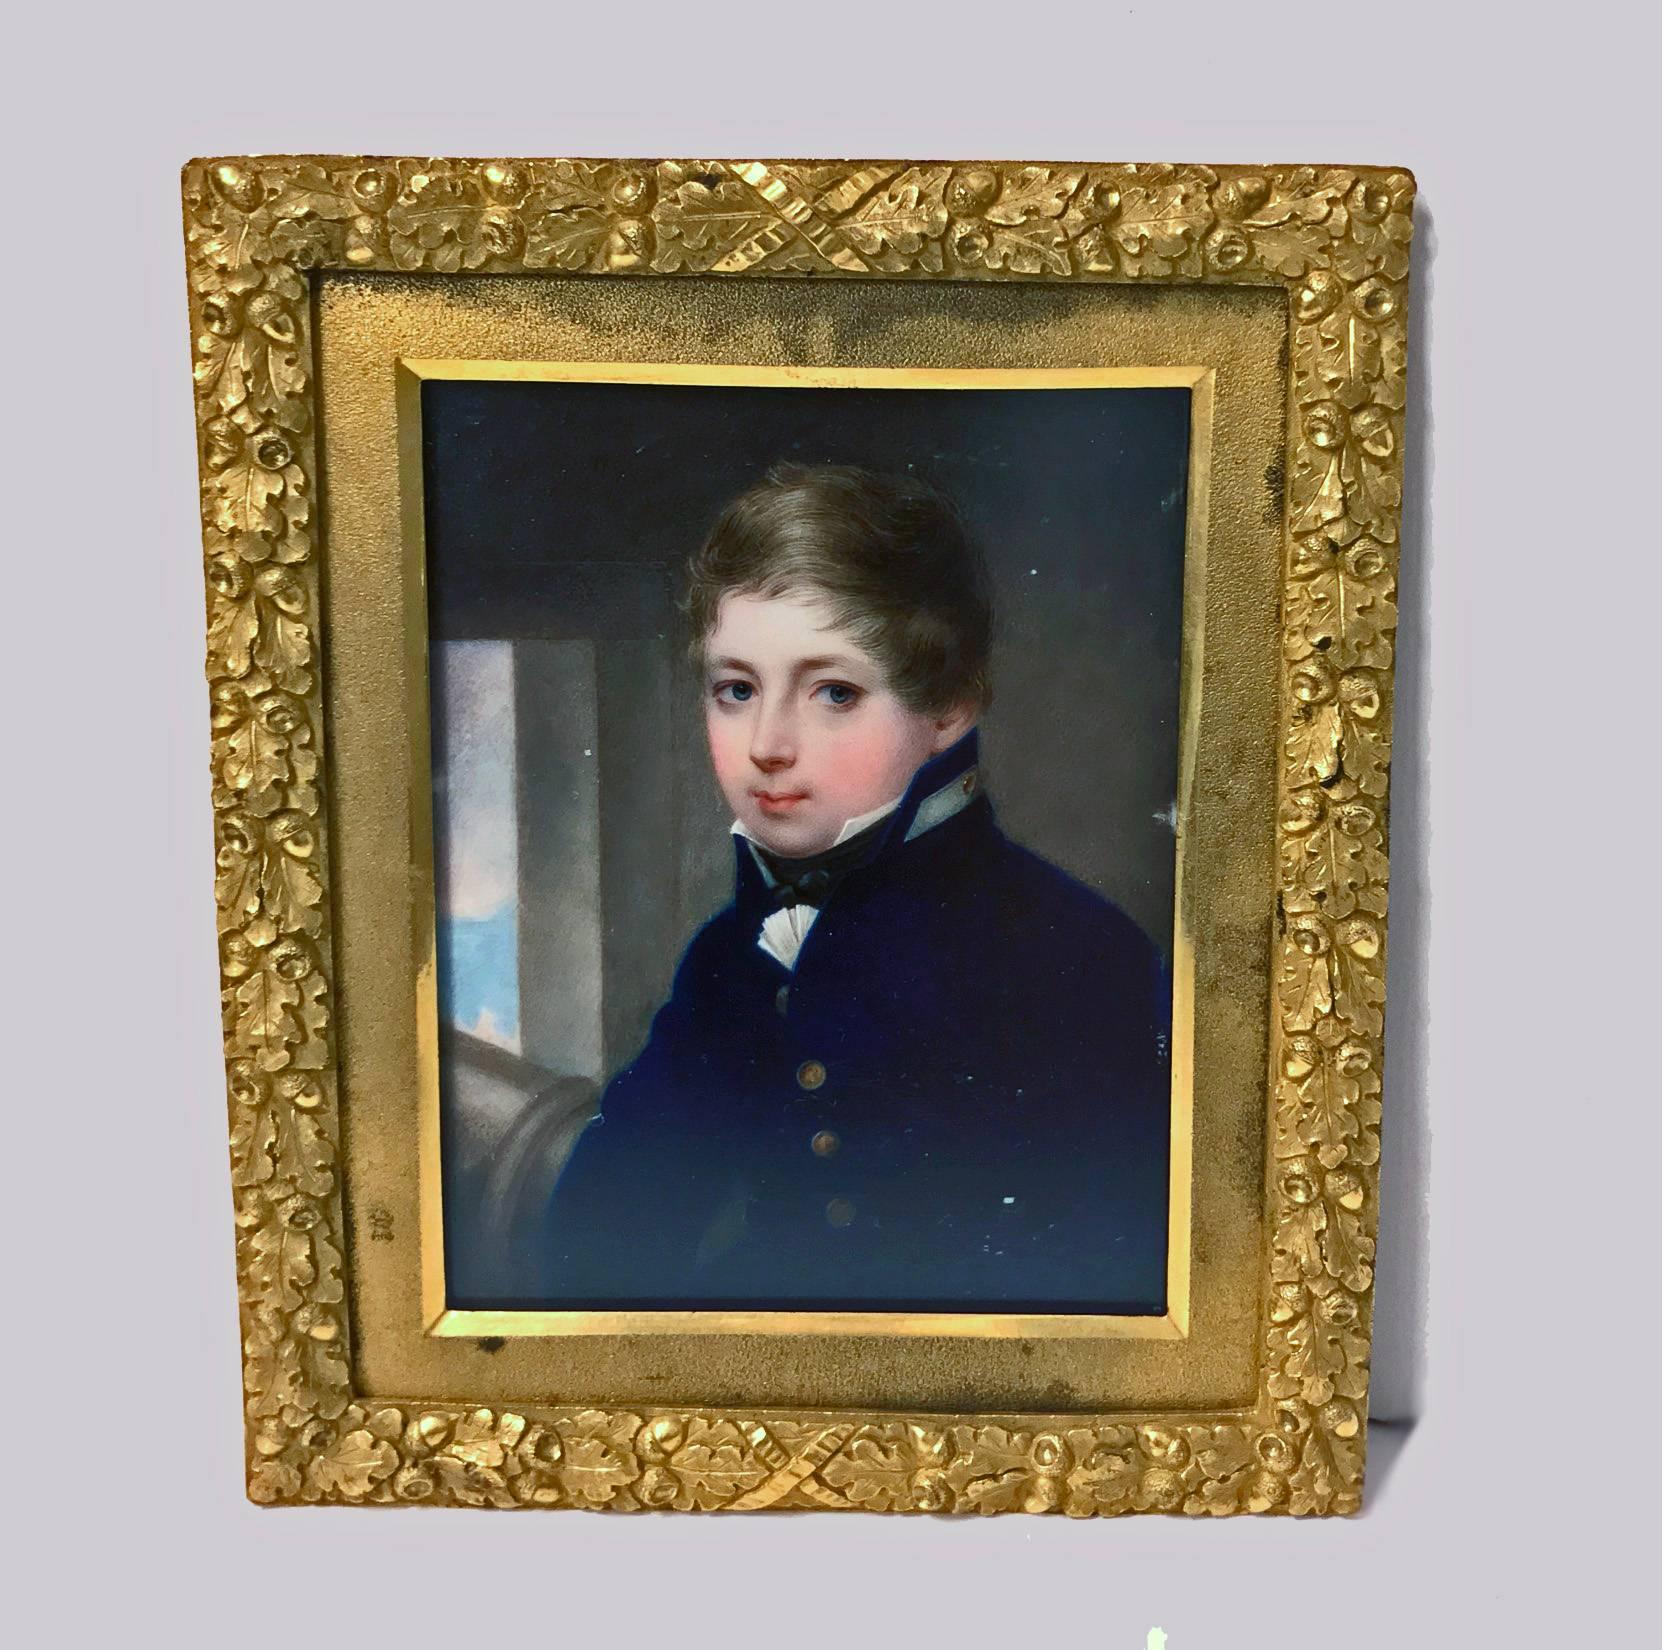 Portrait Miniature, John Cox Dillman Engleheart (1783 - 1862), circa 1815. Augustus Morgan R.N., as a young Midshipman, wearing blue uniform, the gold buttons stamped with anchors, frilled white chemise and tied black stock, a cannon and gun port in